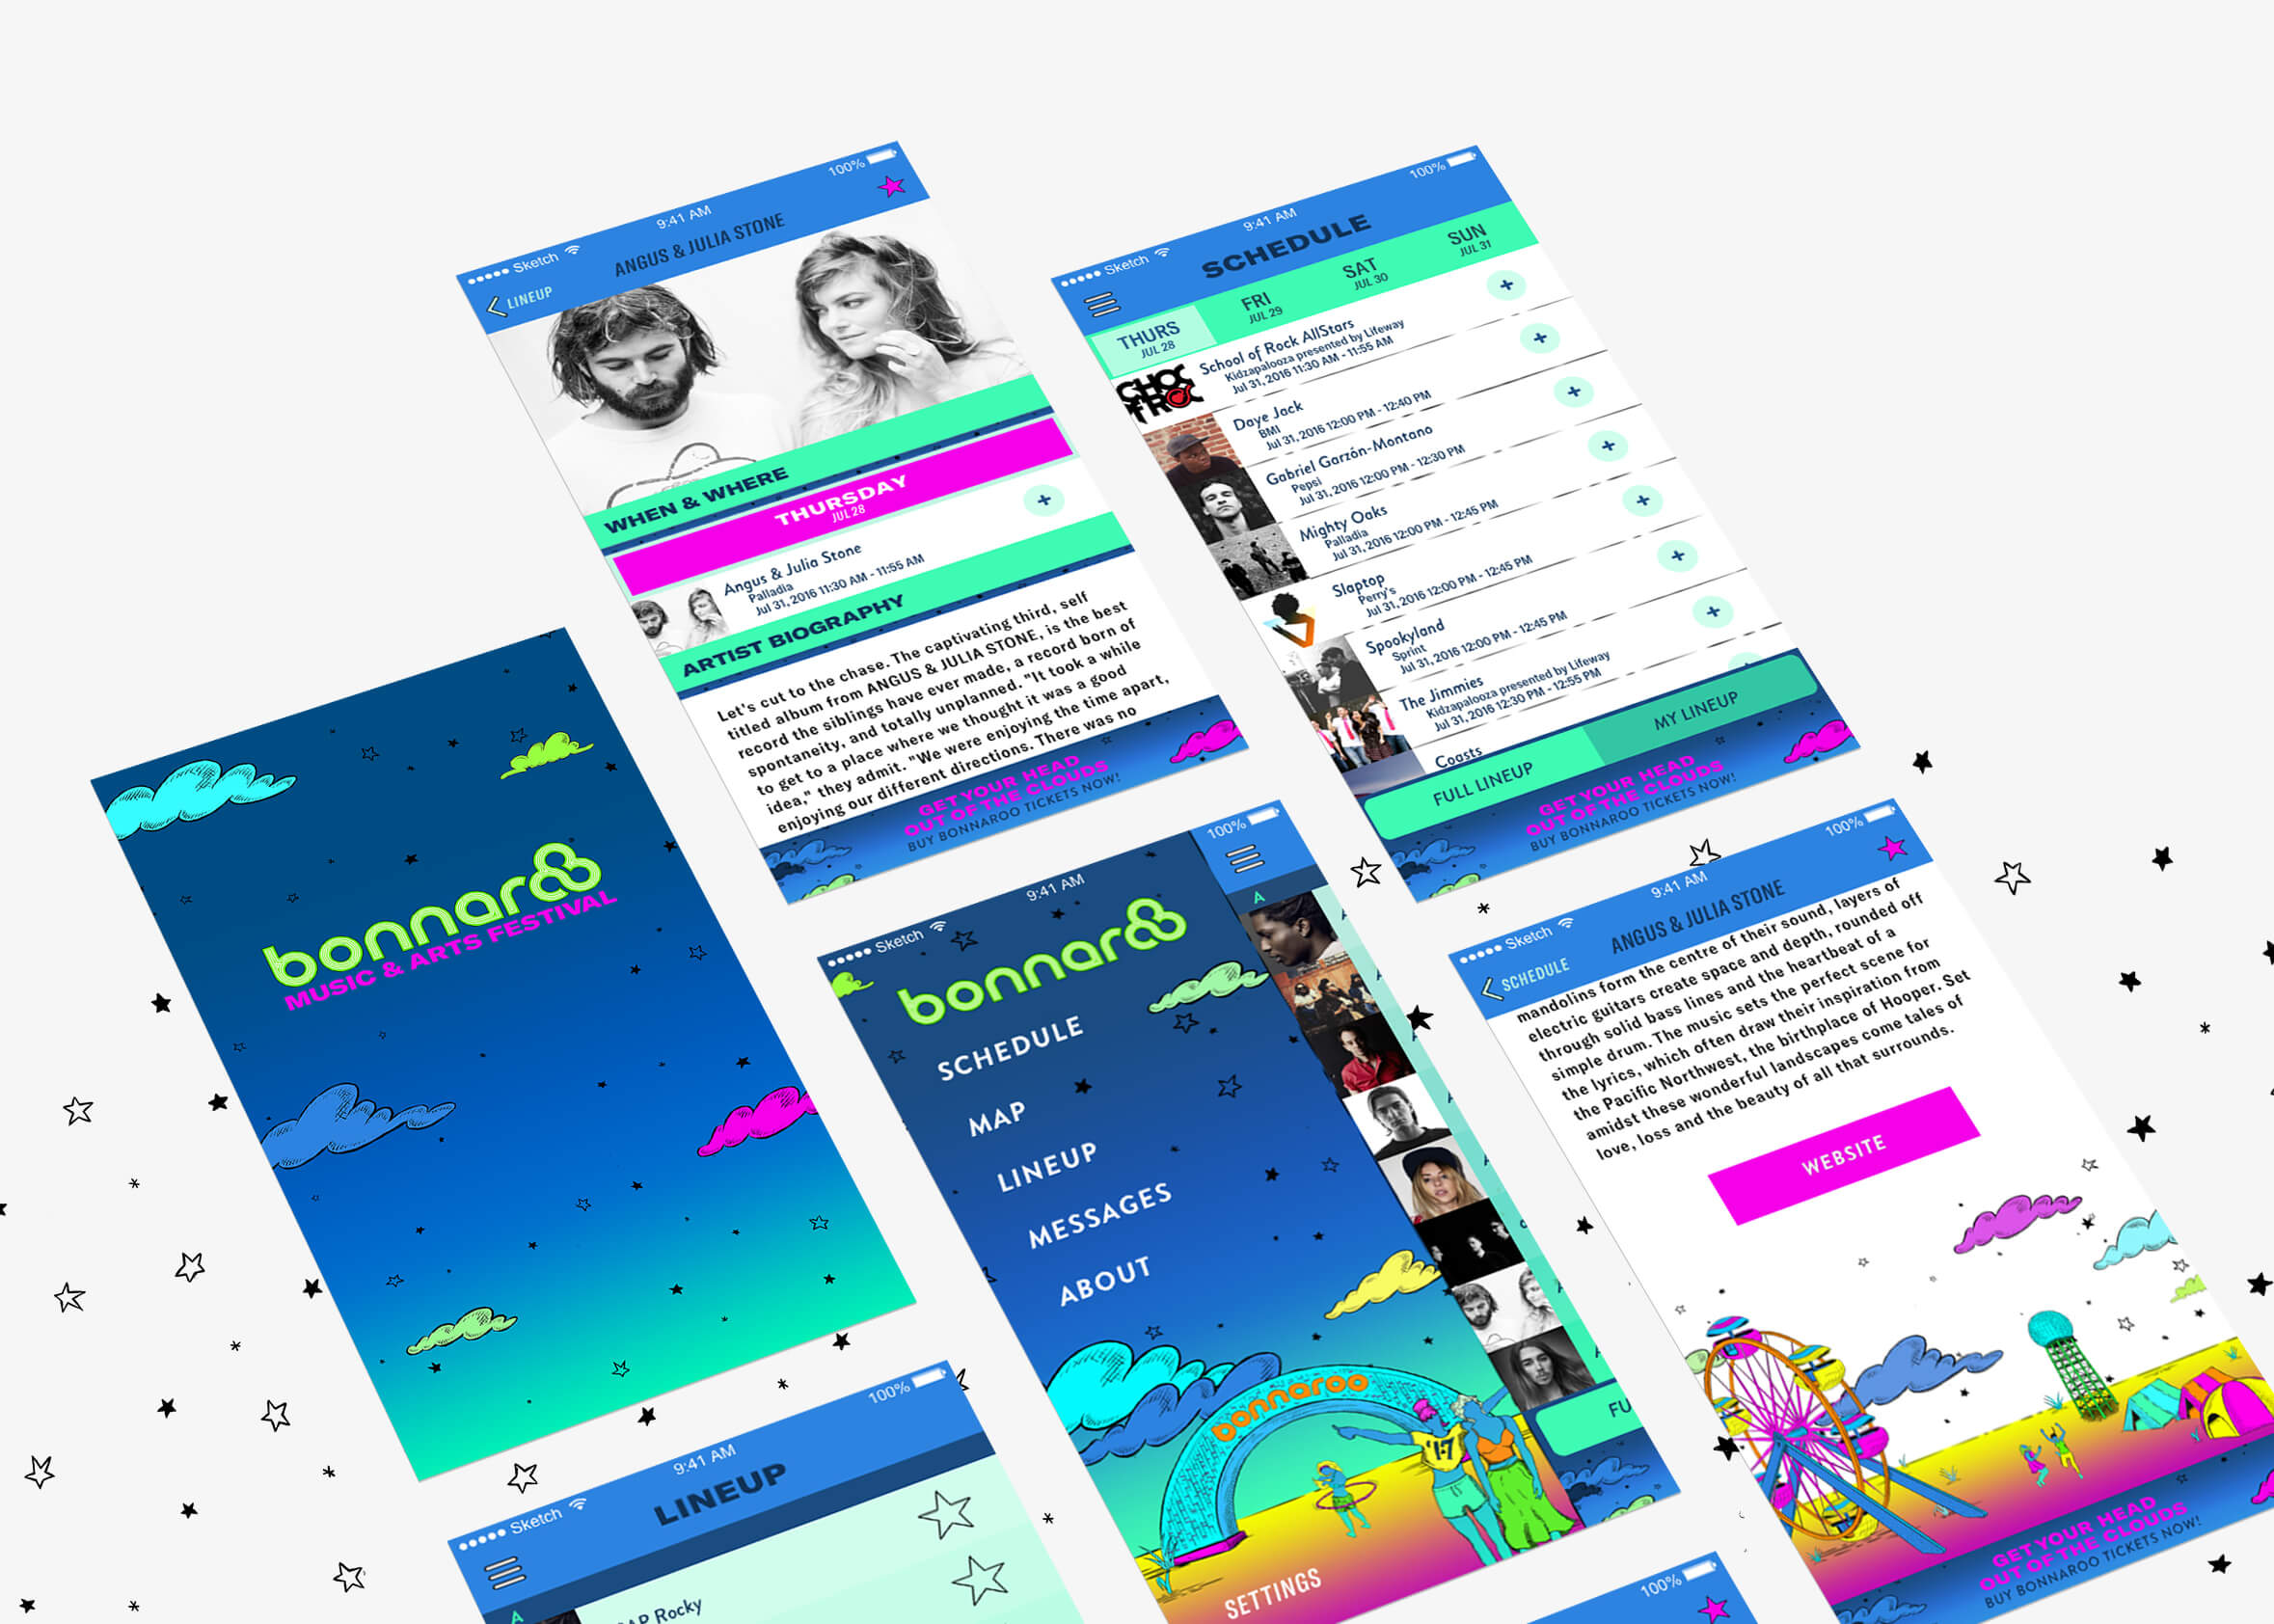 An arrangement of screens showing the skinning of the Bonnaroo Mobile App.